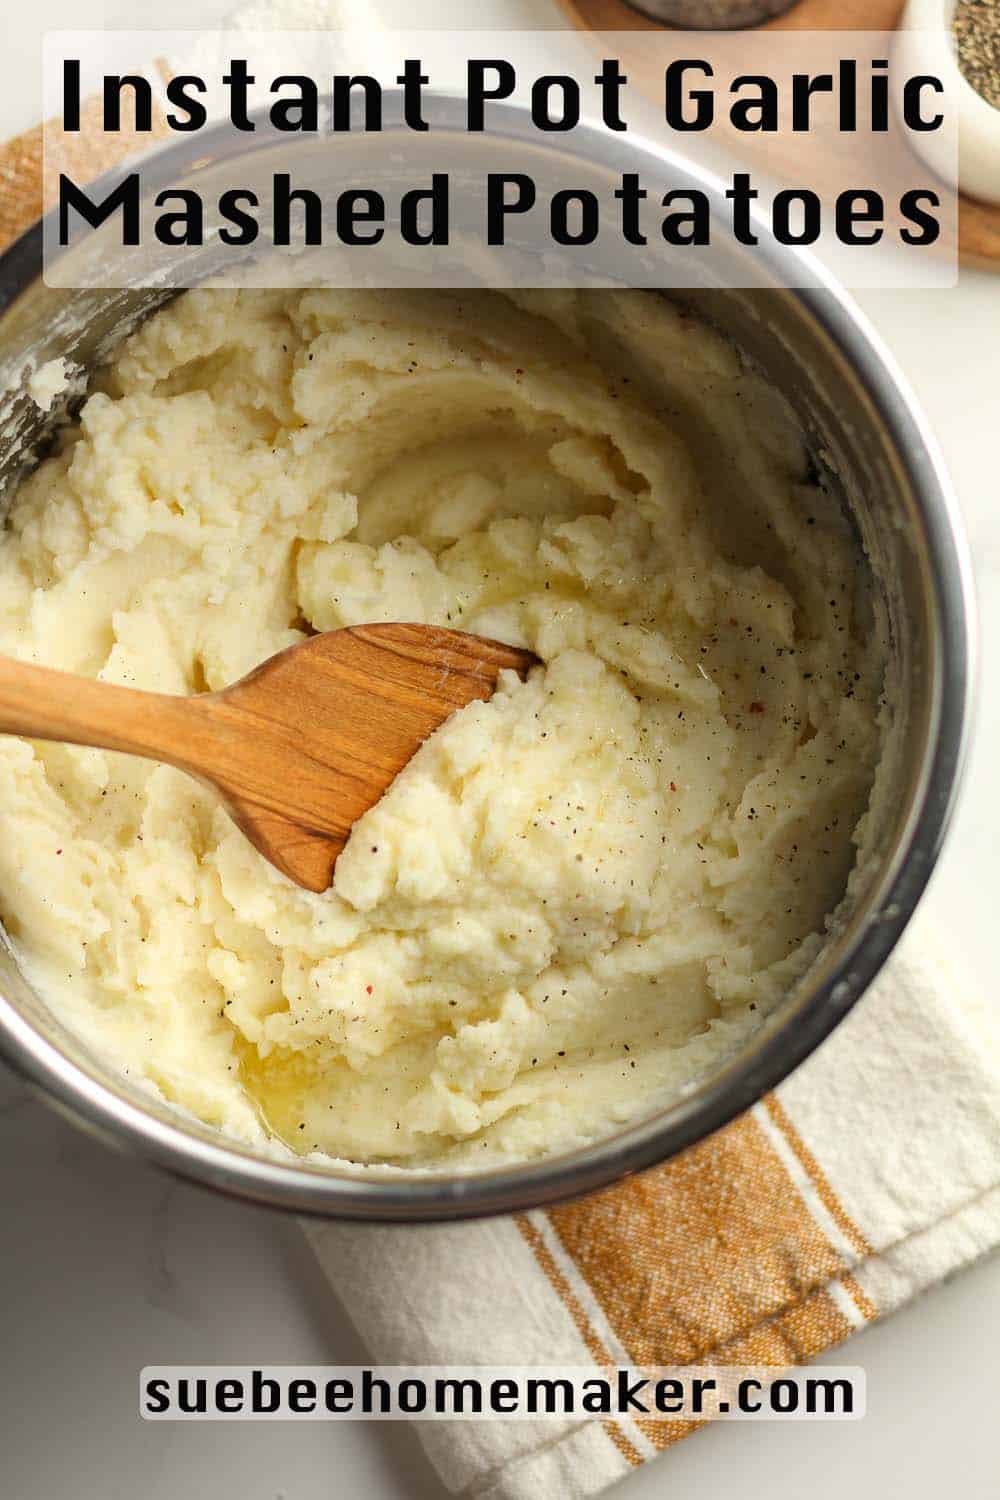 An instant pot full of garlic mashed potatoes.